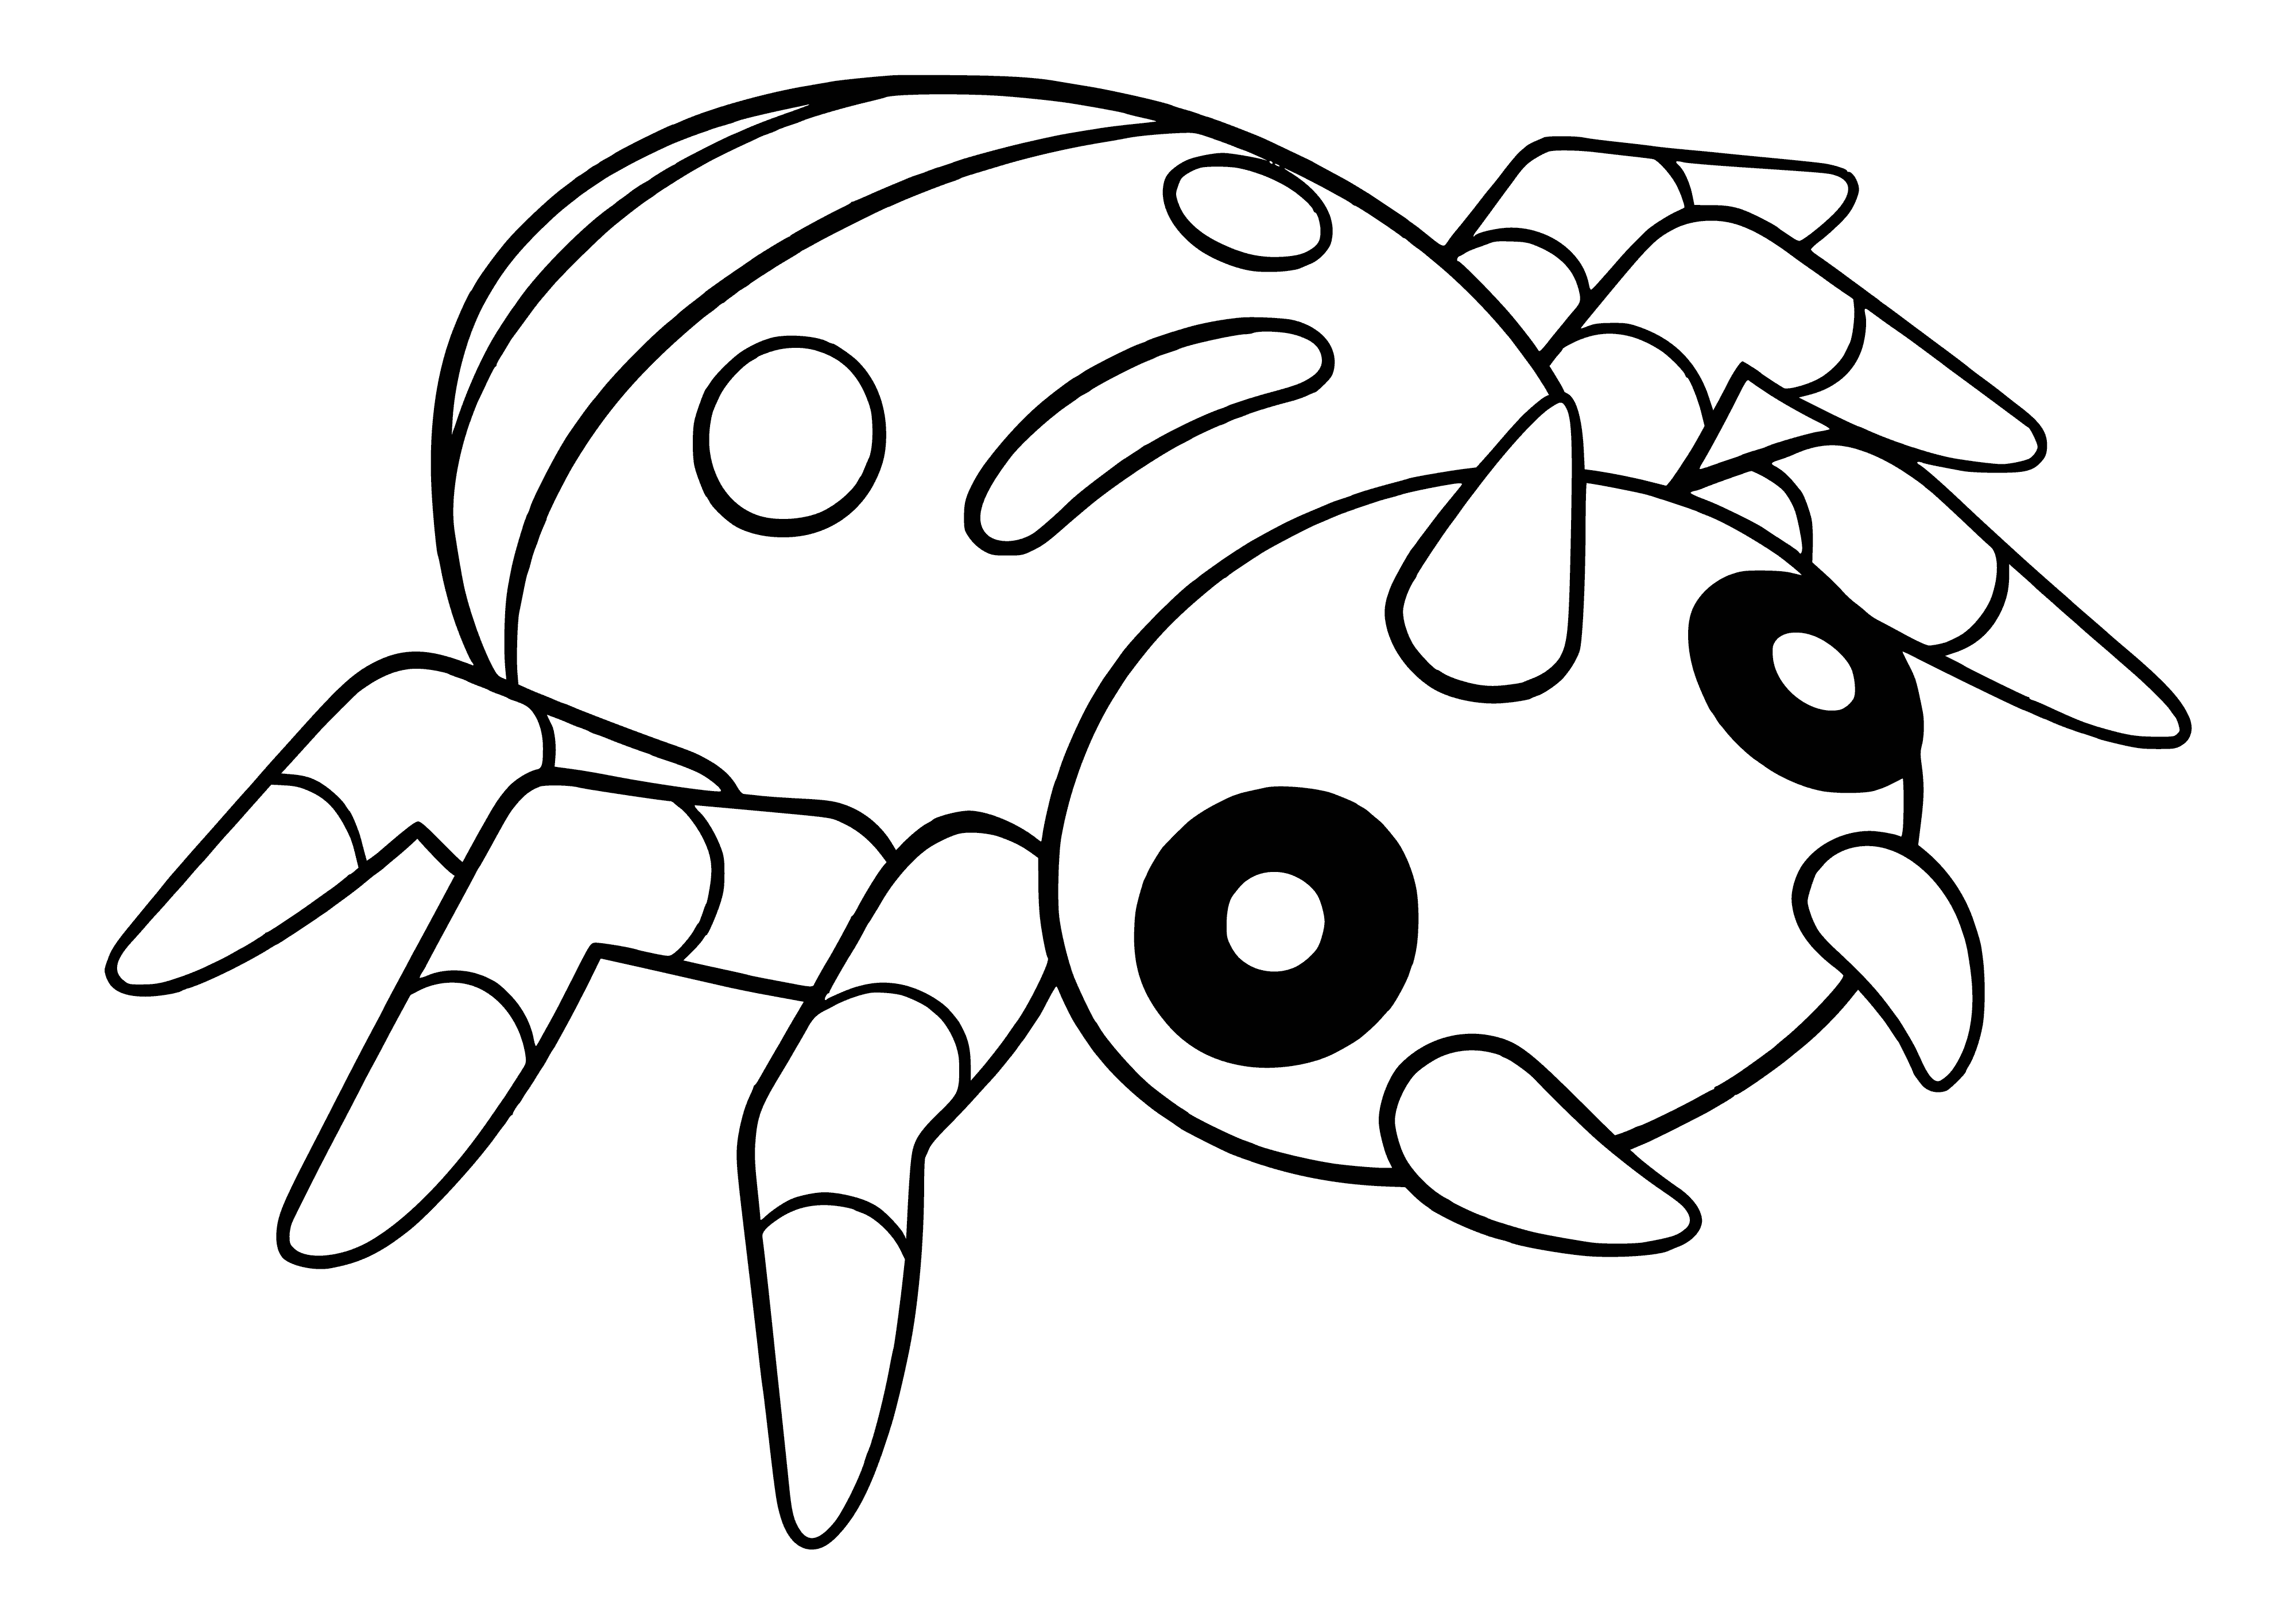 coloring page: This small black Pokemon with a red hourglass-shaped mark is Spinarak, evolving into Ariados at level 22. It has four thin legs, large eyes, and a small mouth with two fangs.